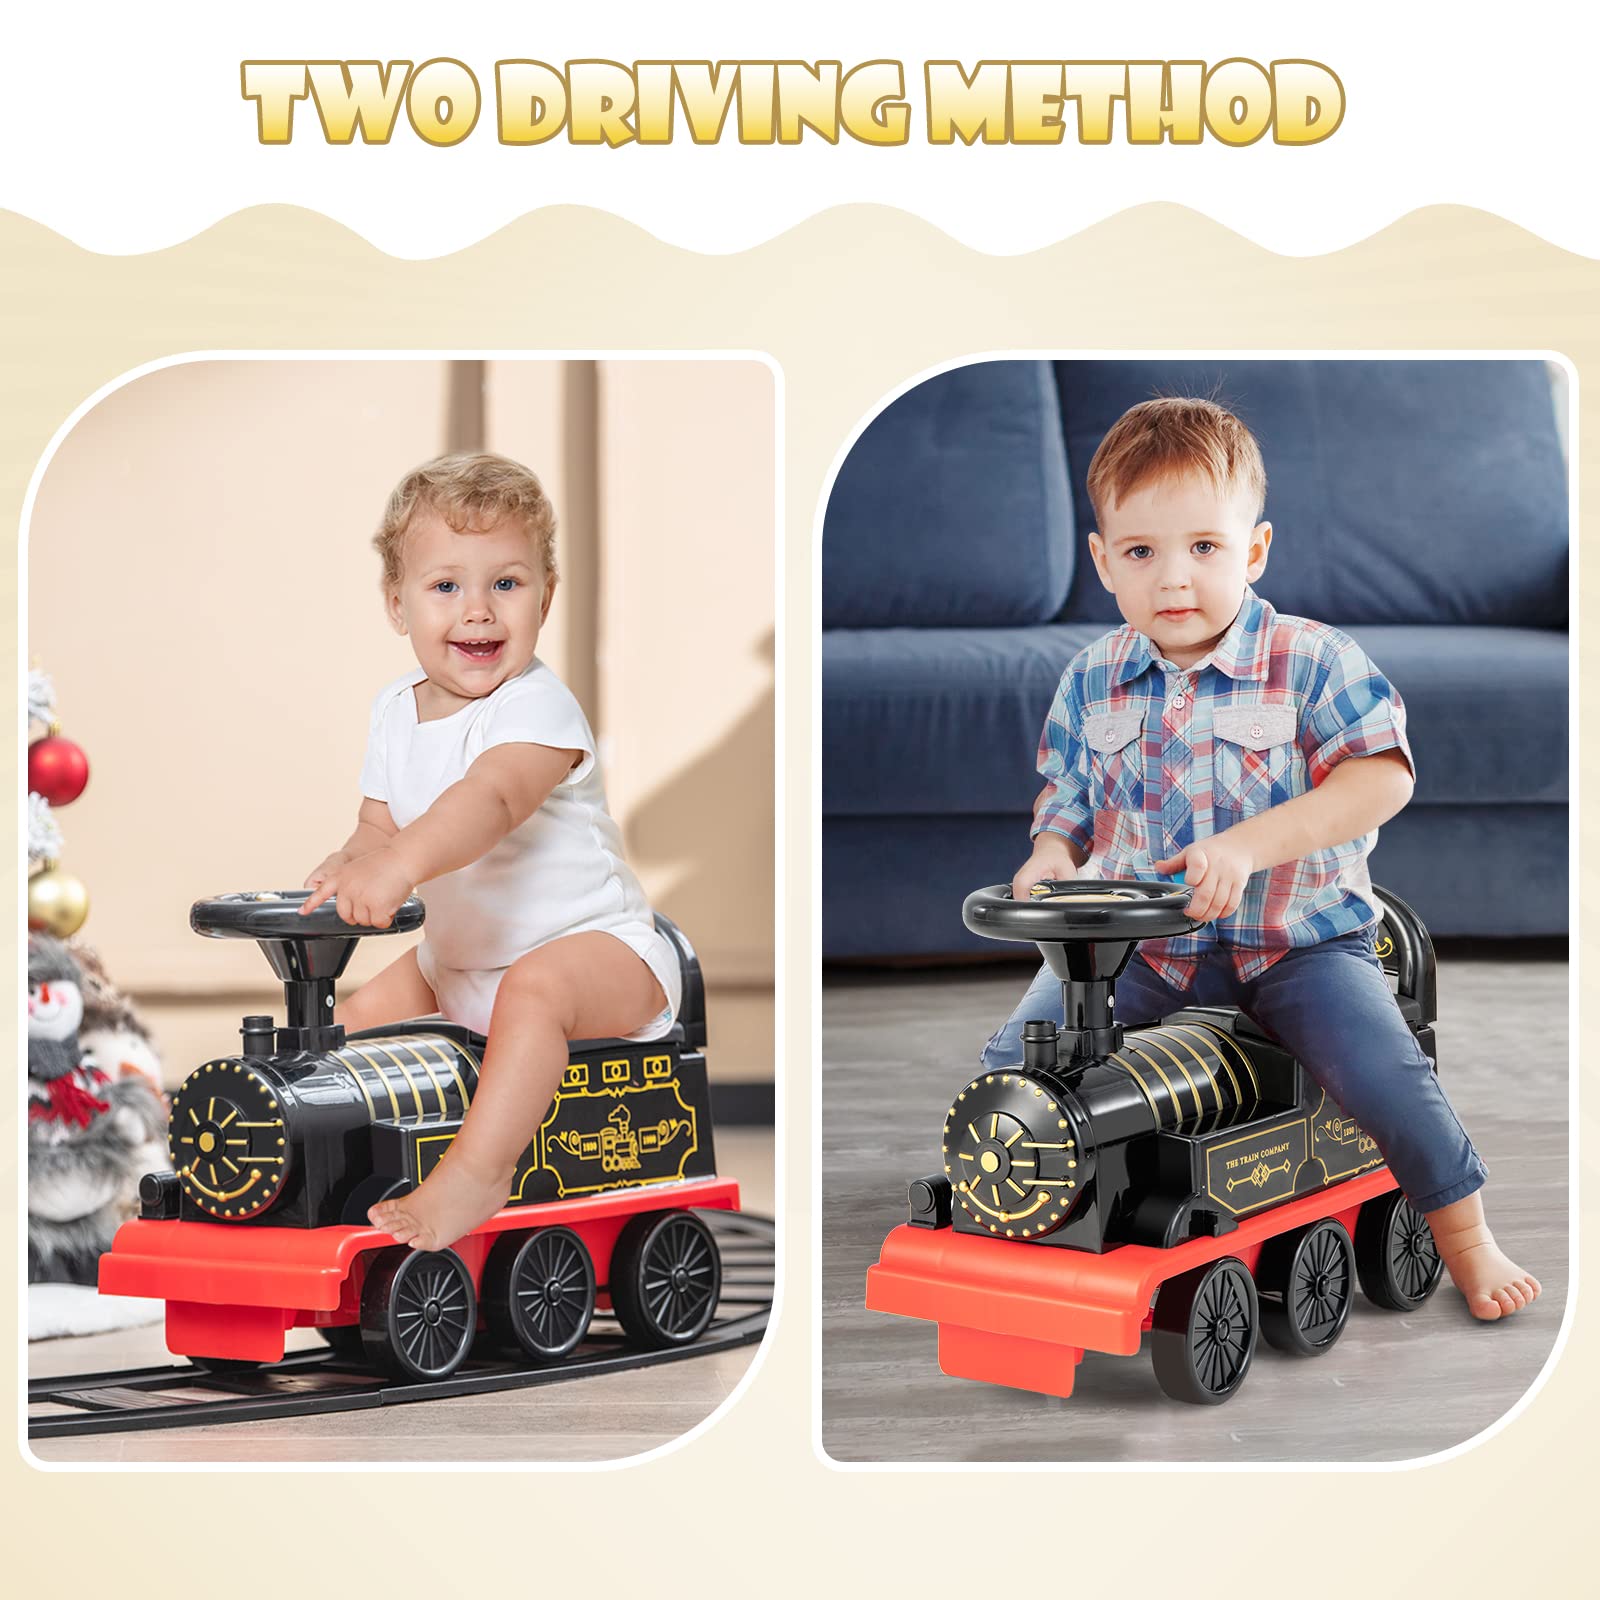 INFANS Kids Ride on Train with Track, 6V Electric Toy with Lights and